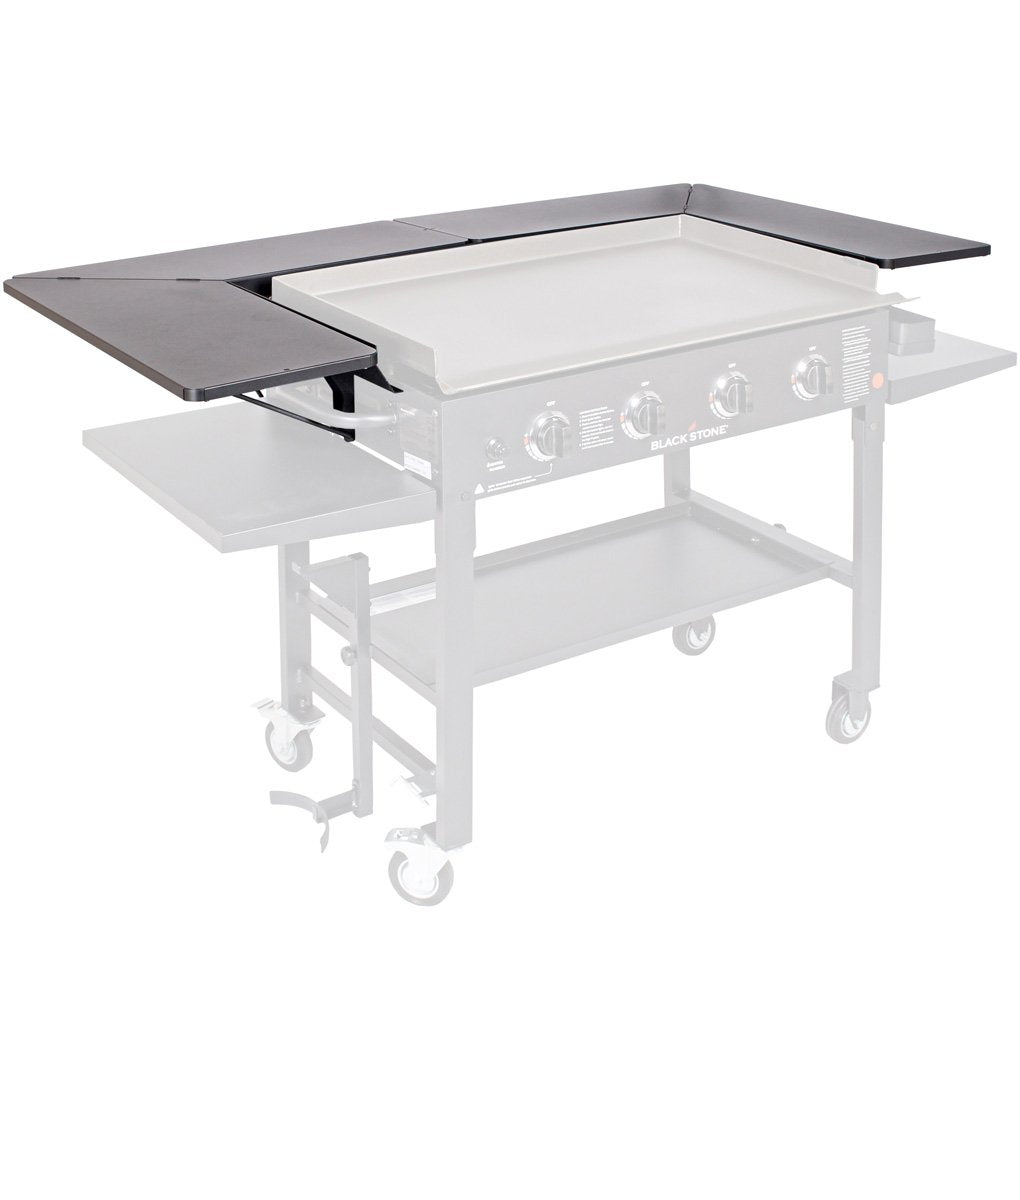 Blackstone Signature Accessories - 36 Inch Griddle Surround Table Accessory - Powder Coated Steel (Grill not included and Doesn't fit the 36